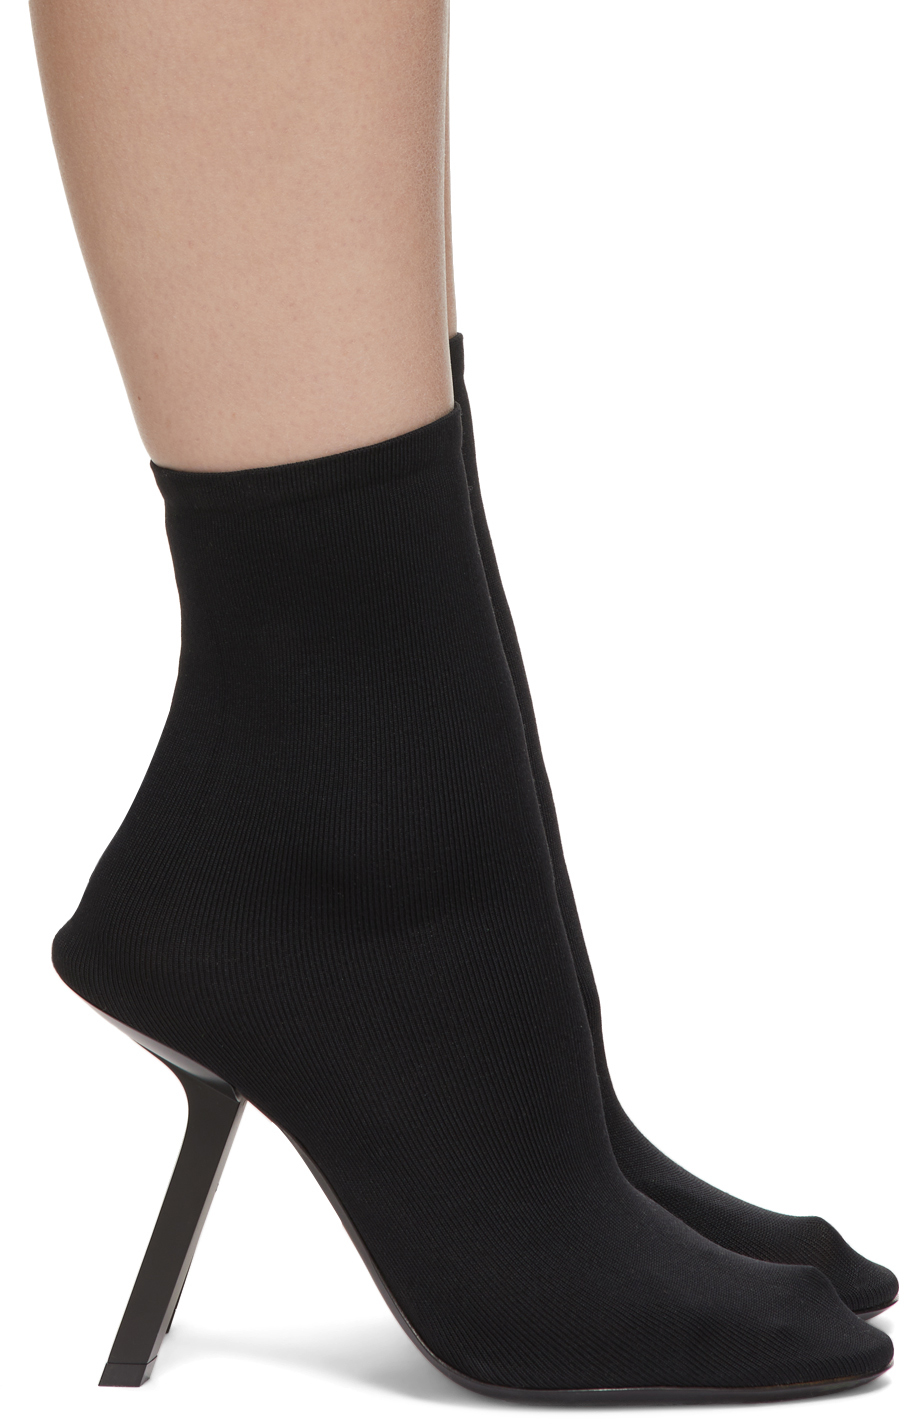 Compressed fragment Diver Black Stretch Heeled Boots by Balenciaga on Sale